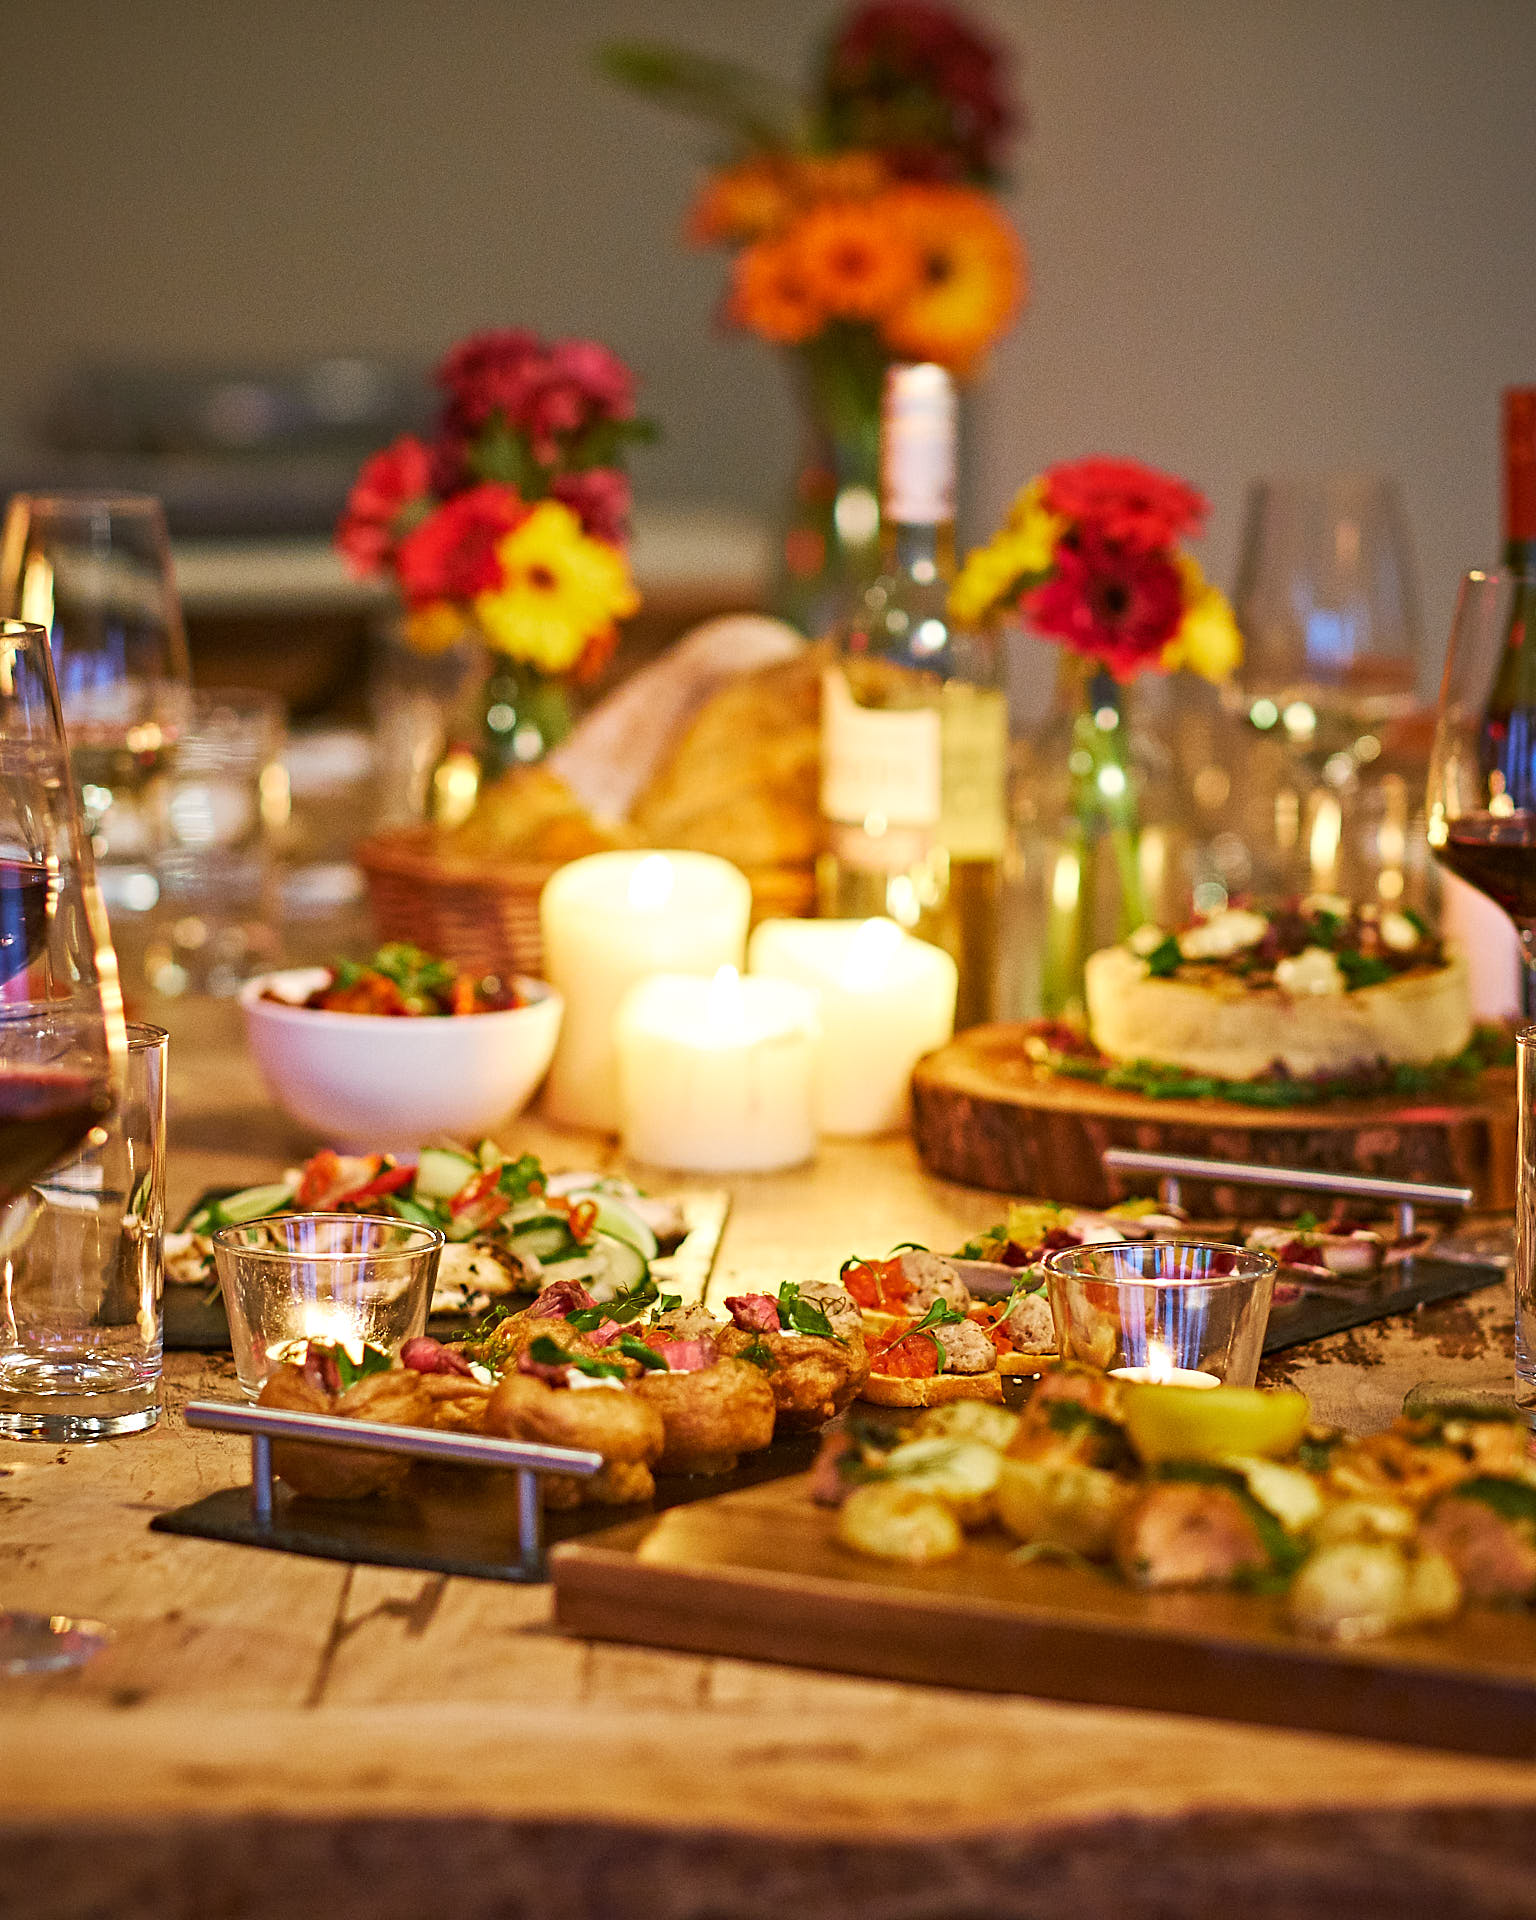 A candle-lit table filled with wooden platters of food to share at a party.